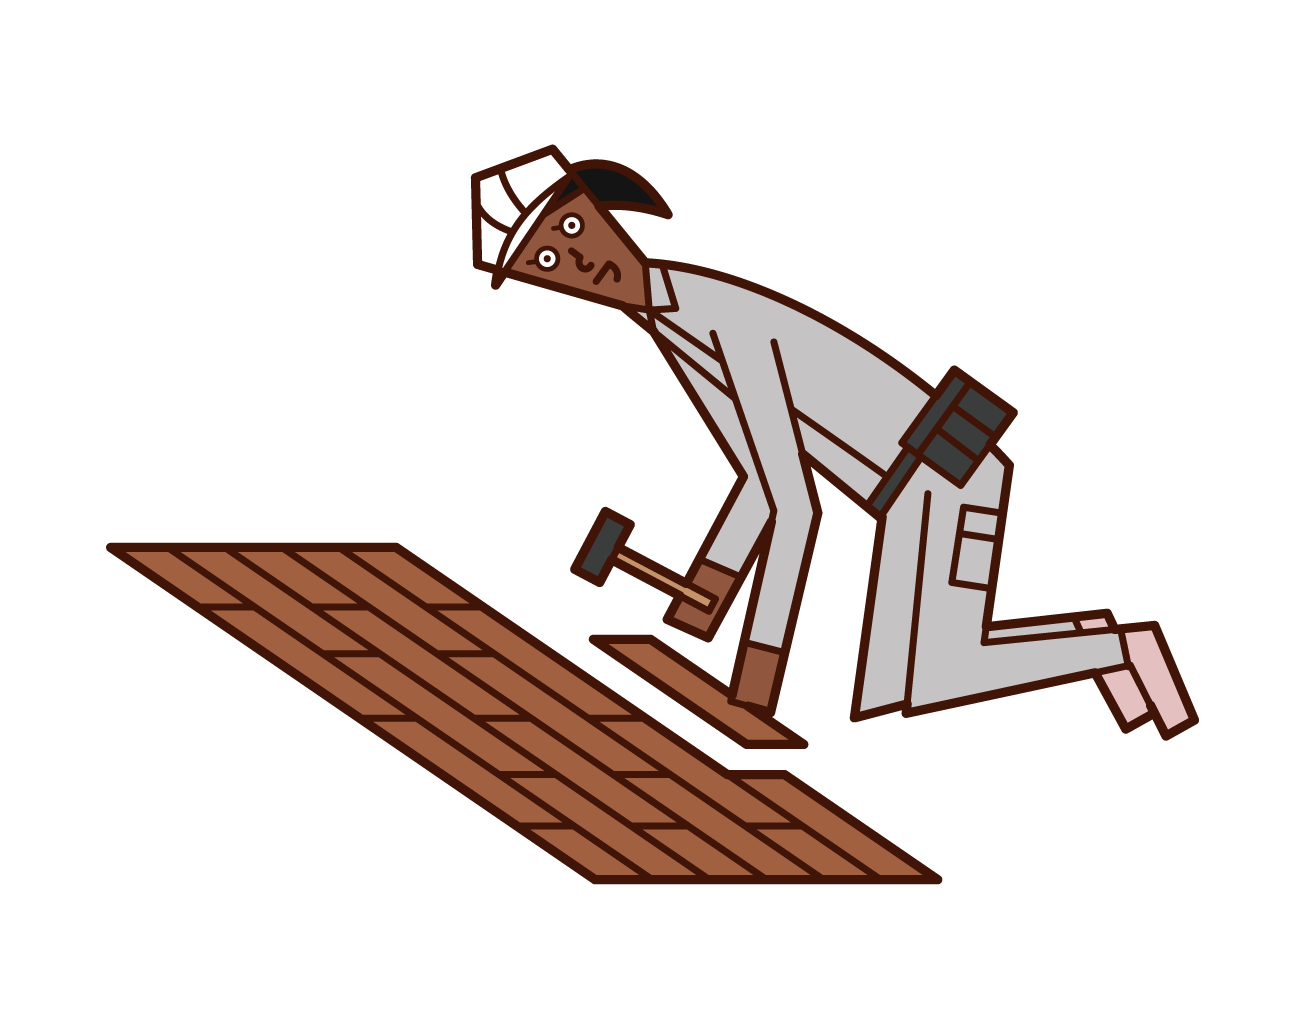 Illustration of a person who pastes flooring and a person (woman) who works on interior work